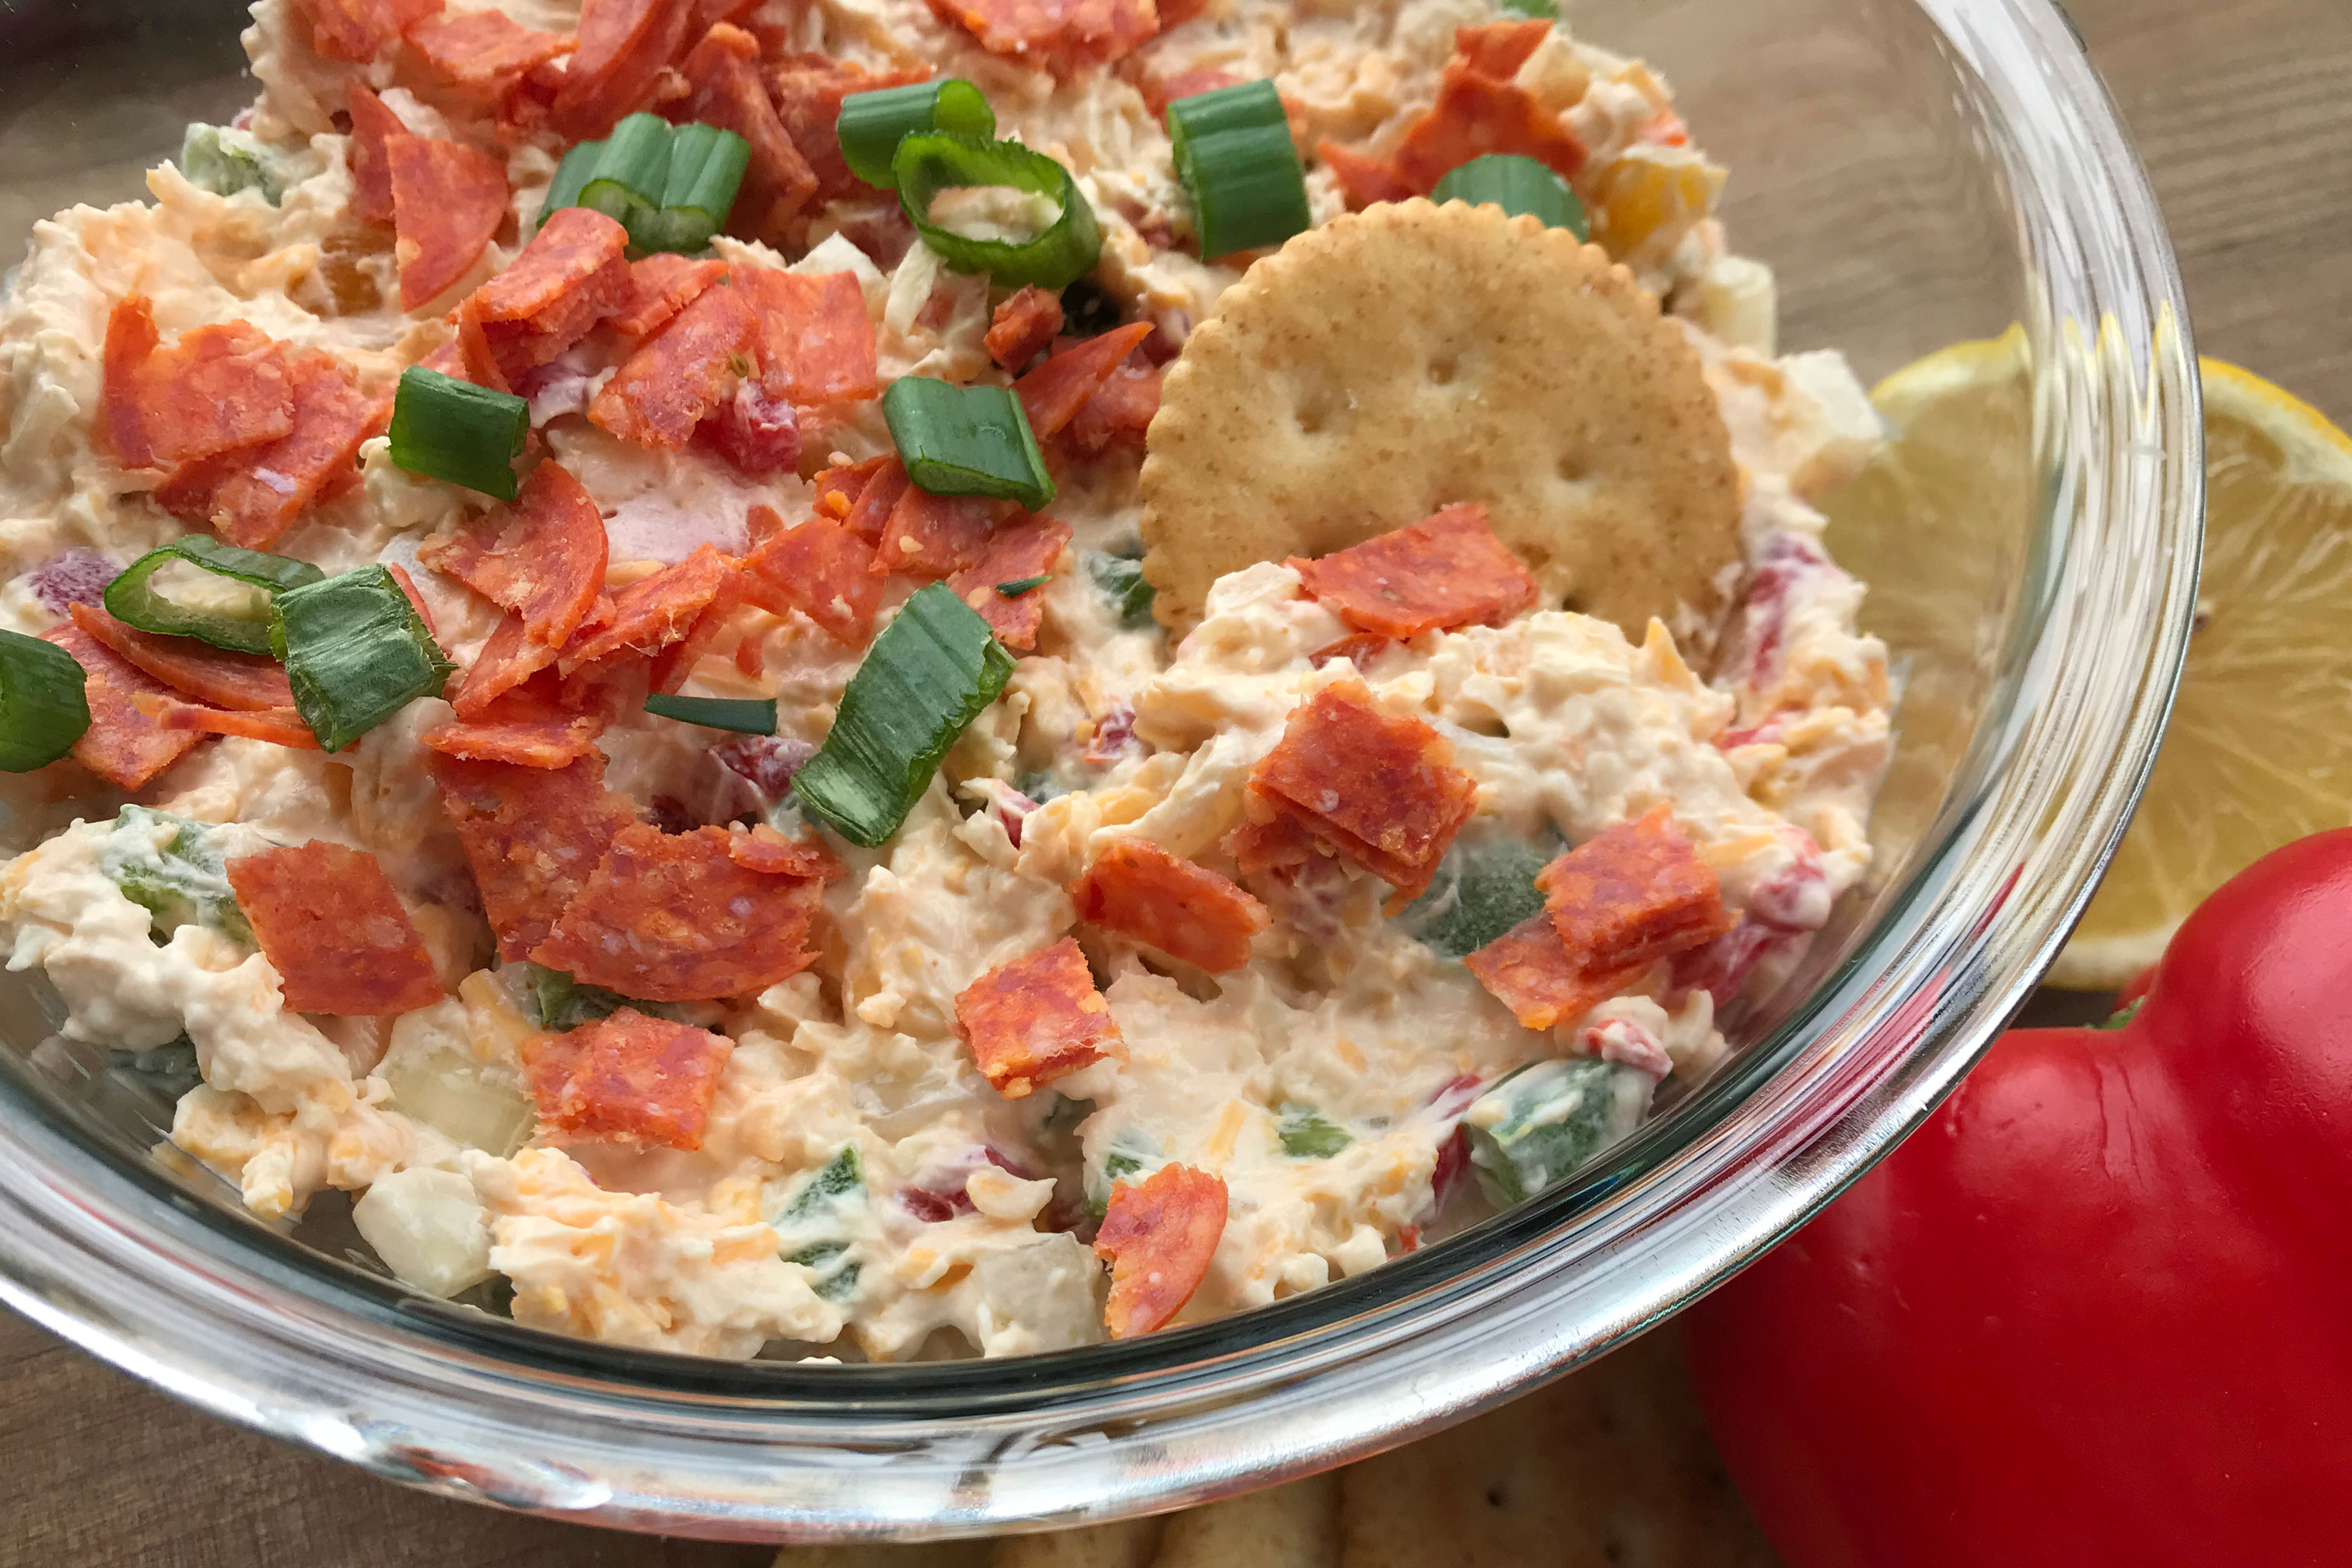 Pepperoni and Peppers Cheese Ball Dip